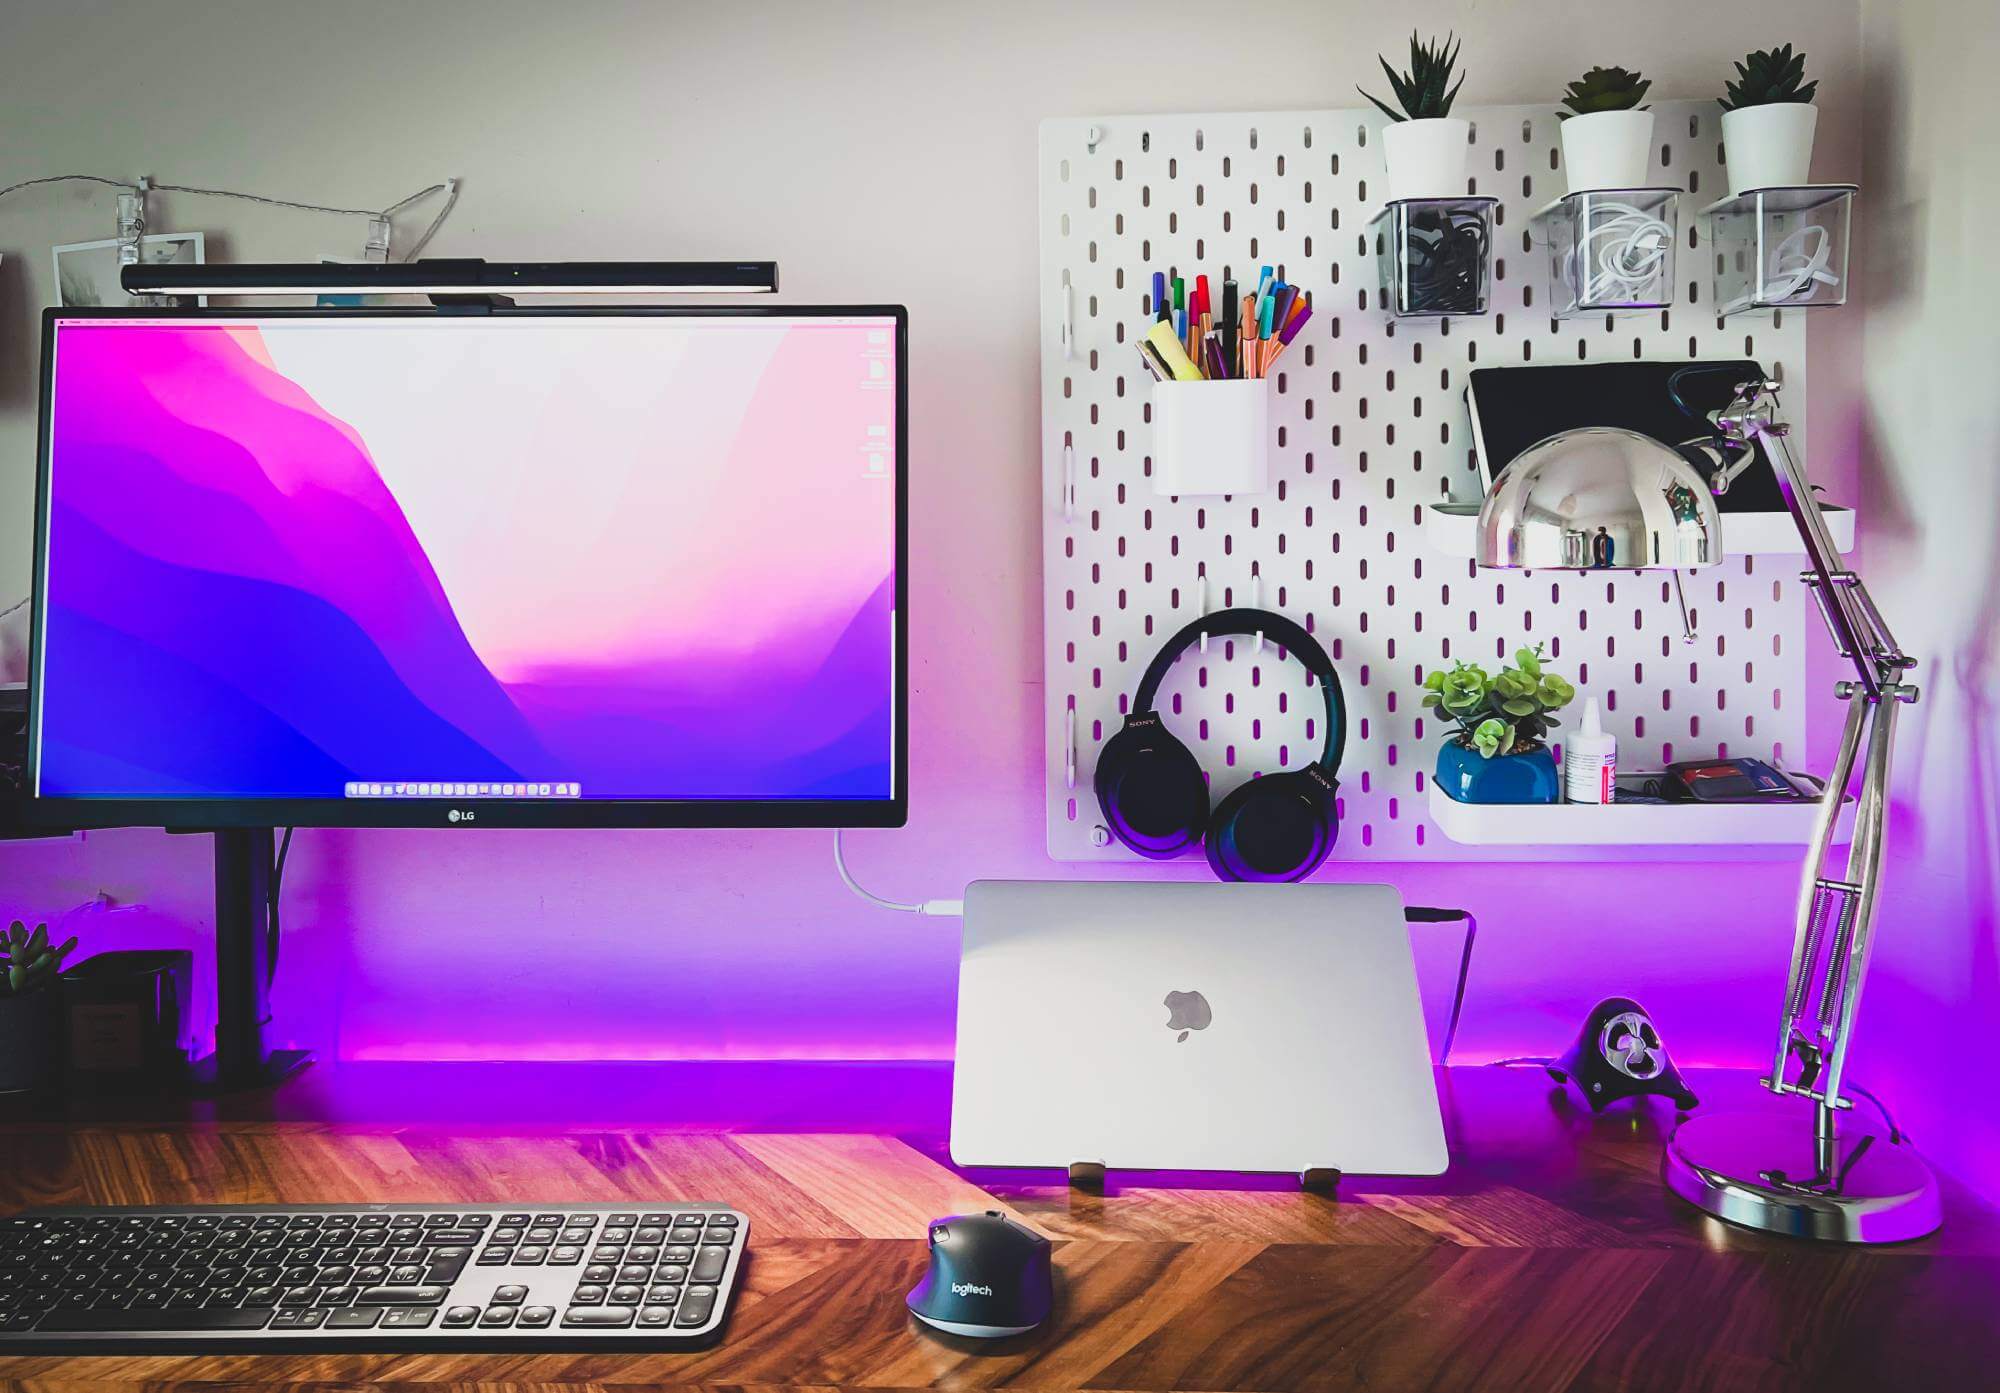 Productivity-boosting RGB workspace at home